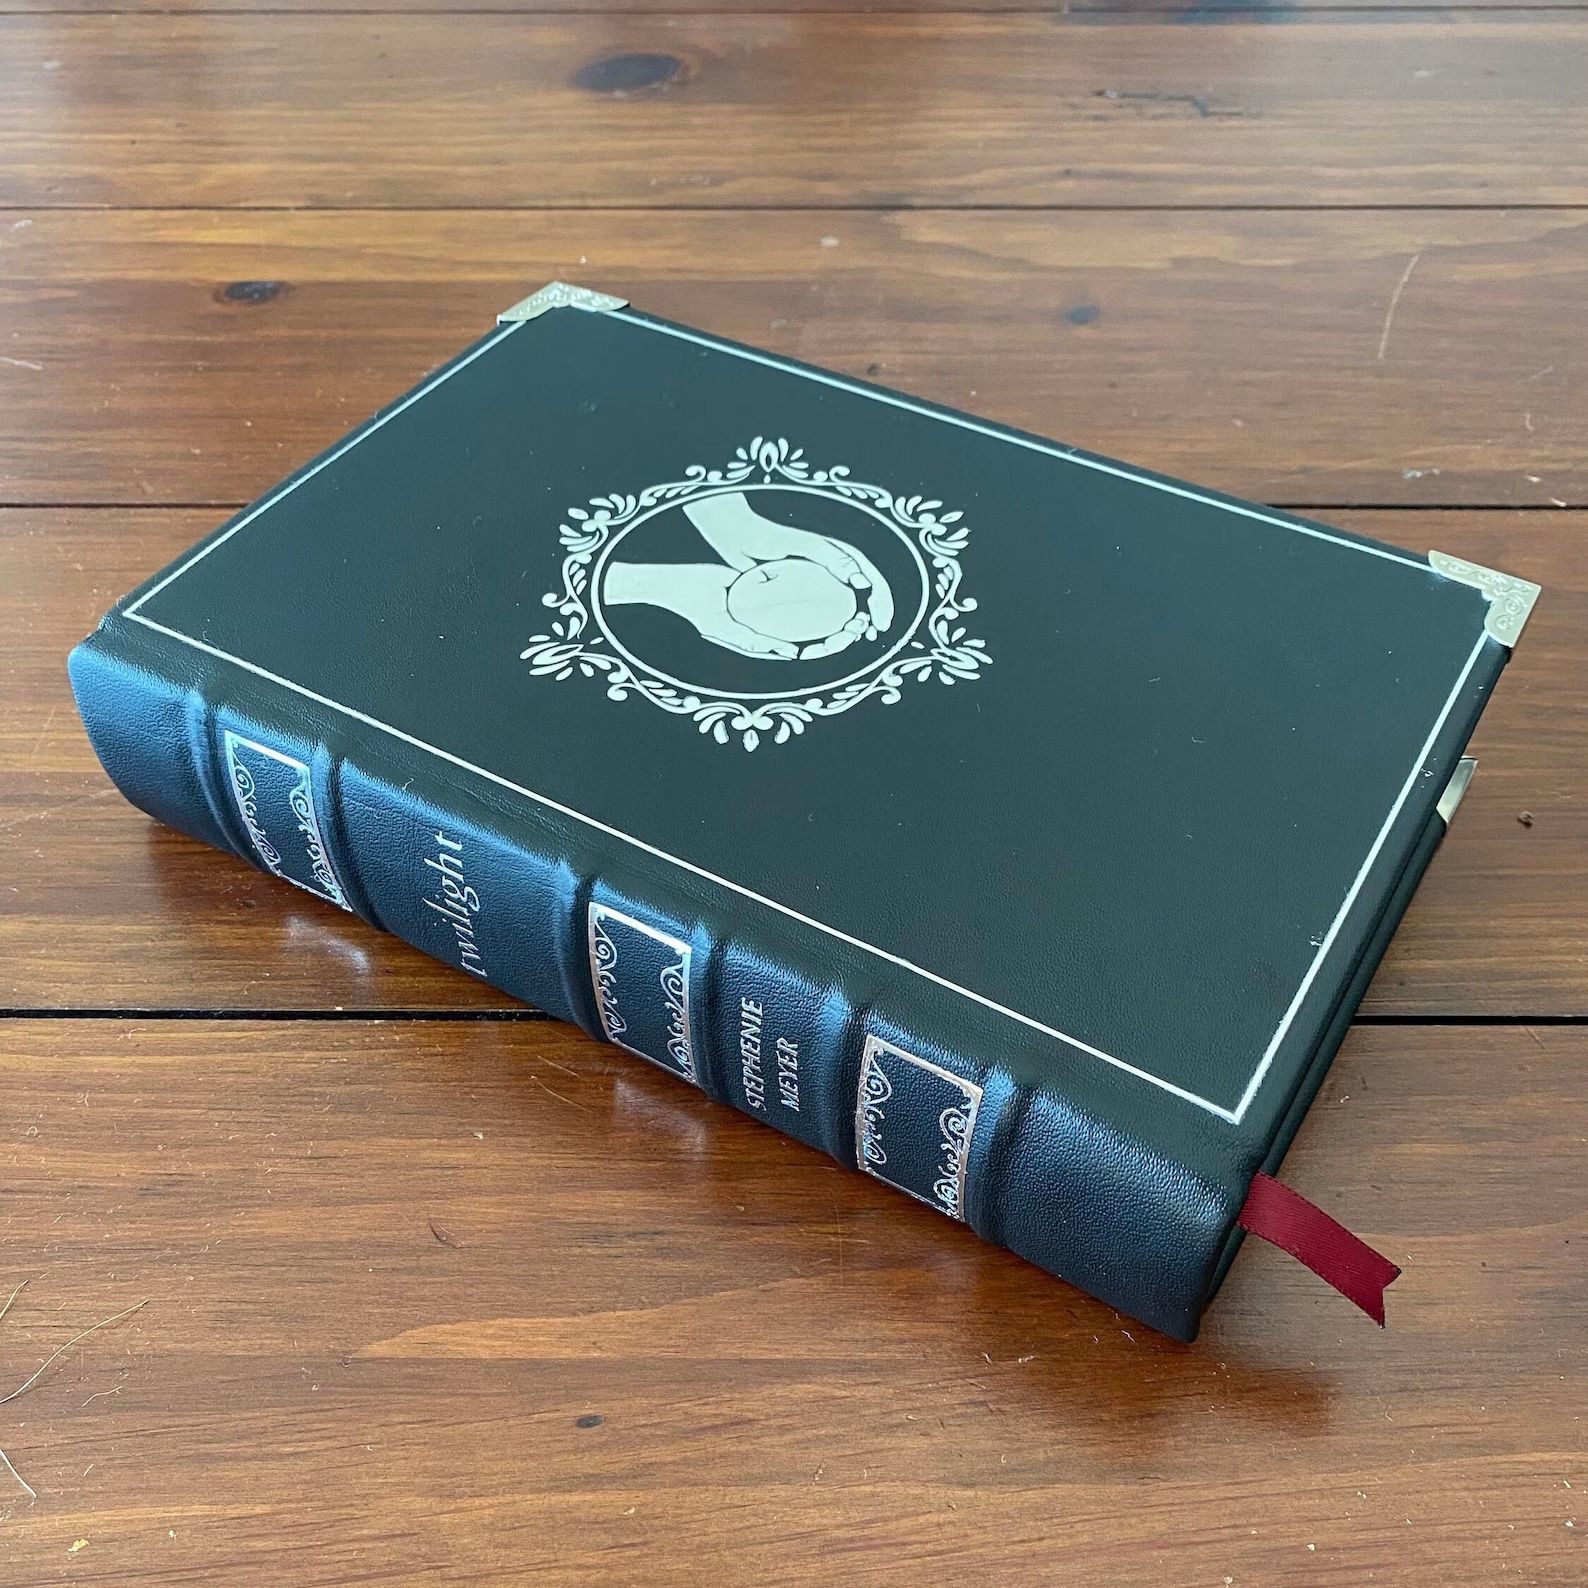 leather bound edition of twilight